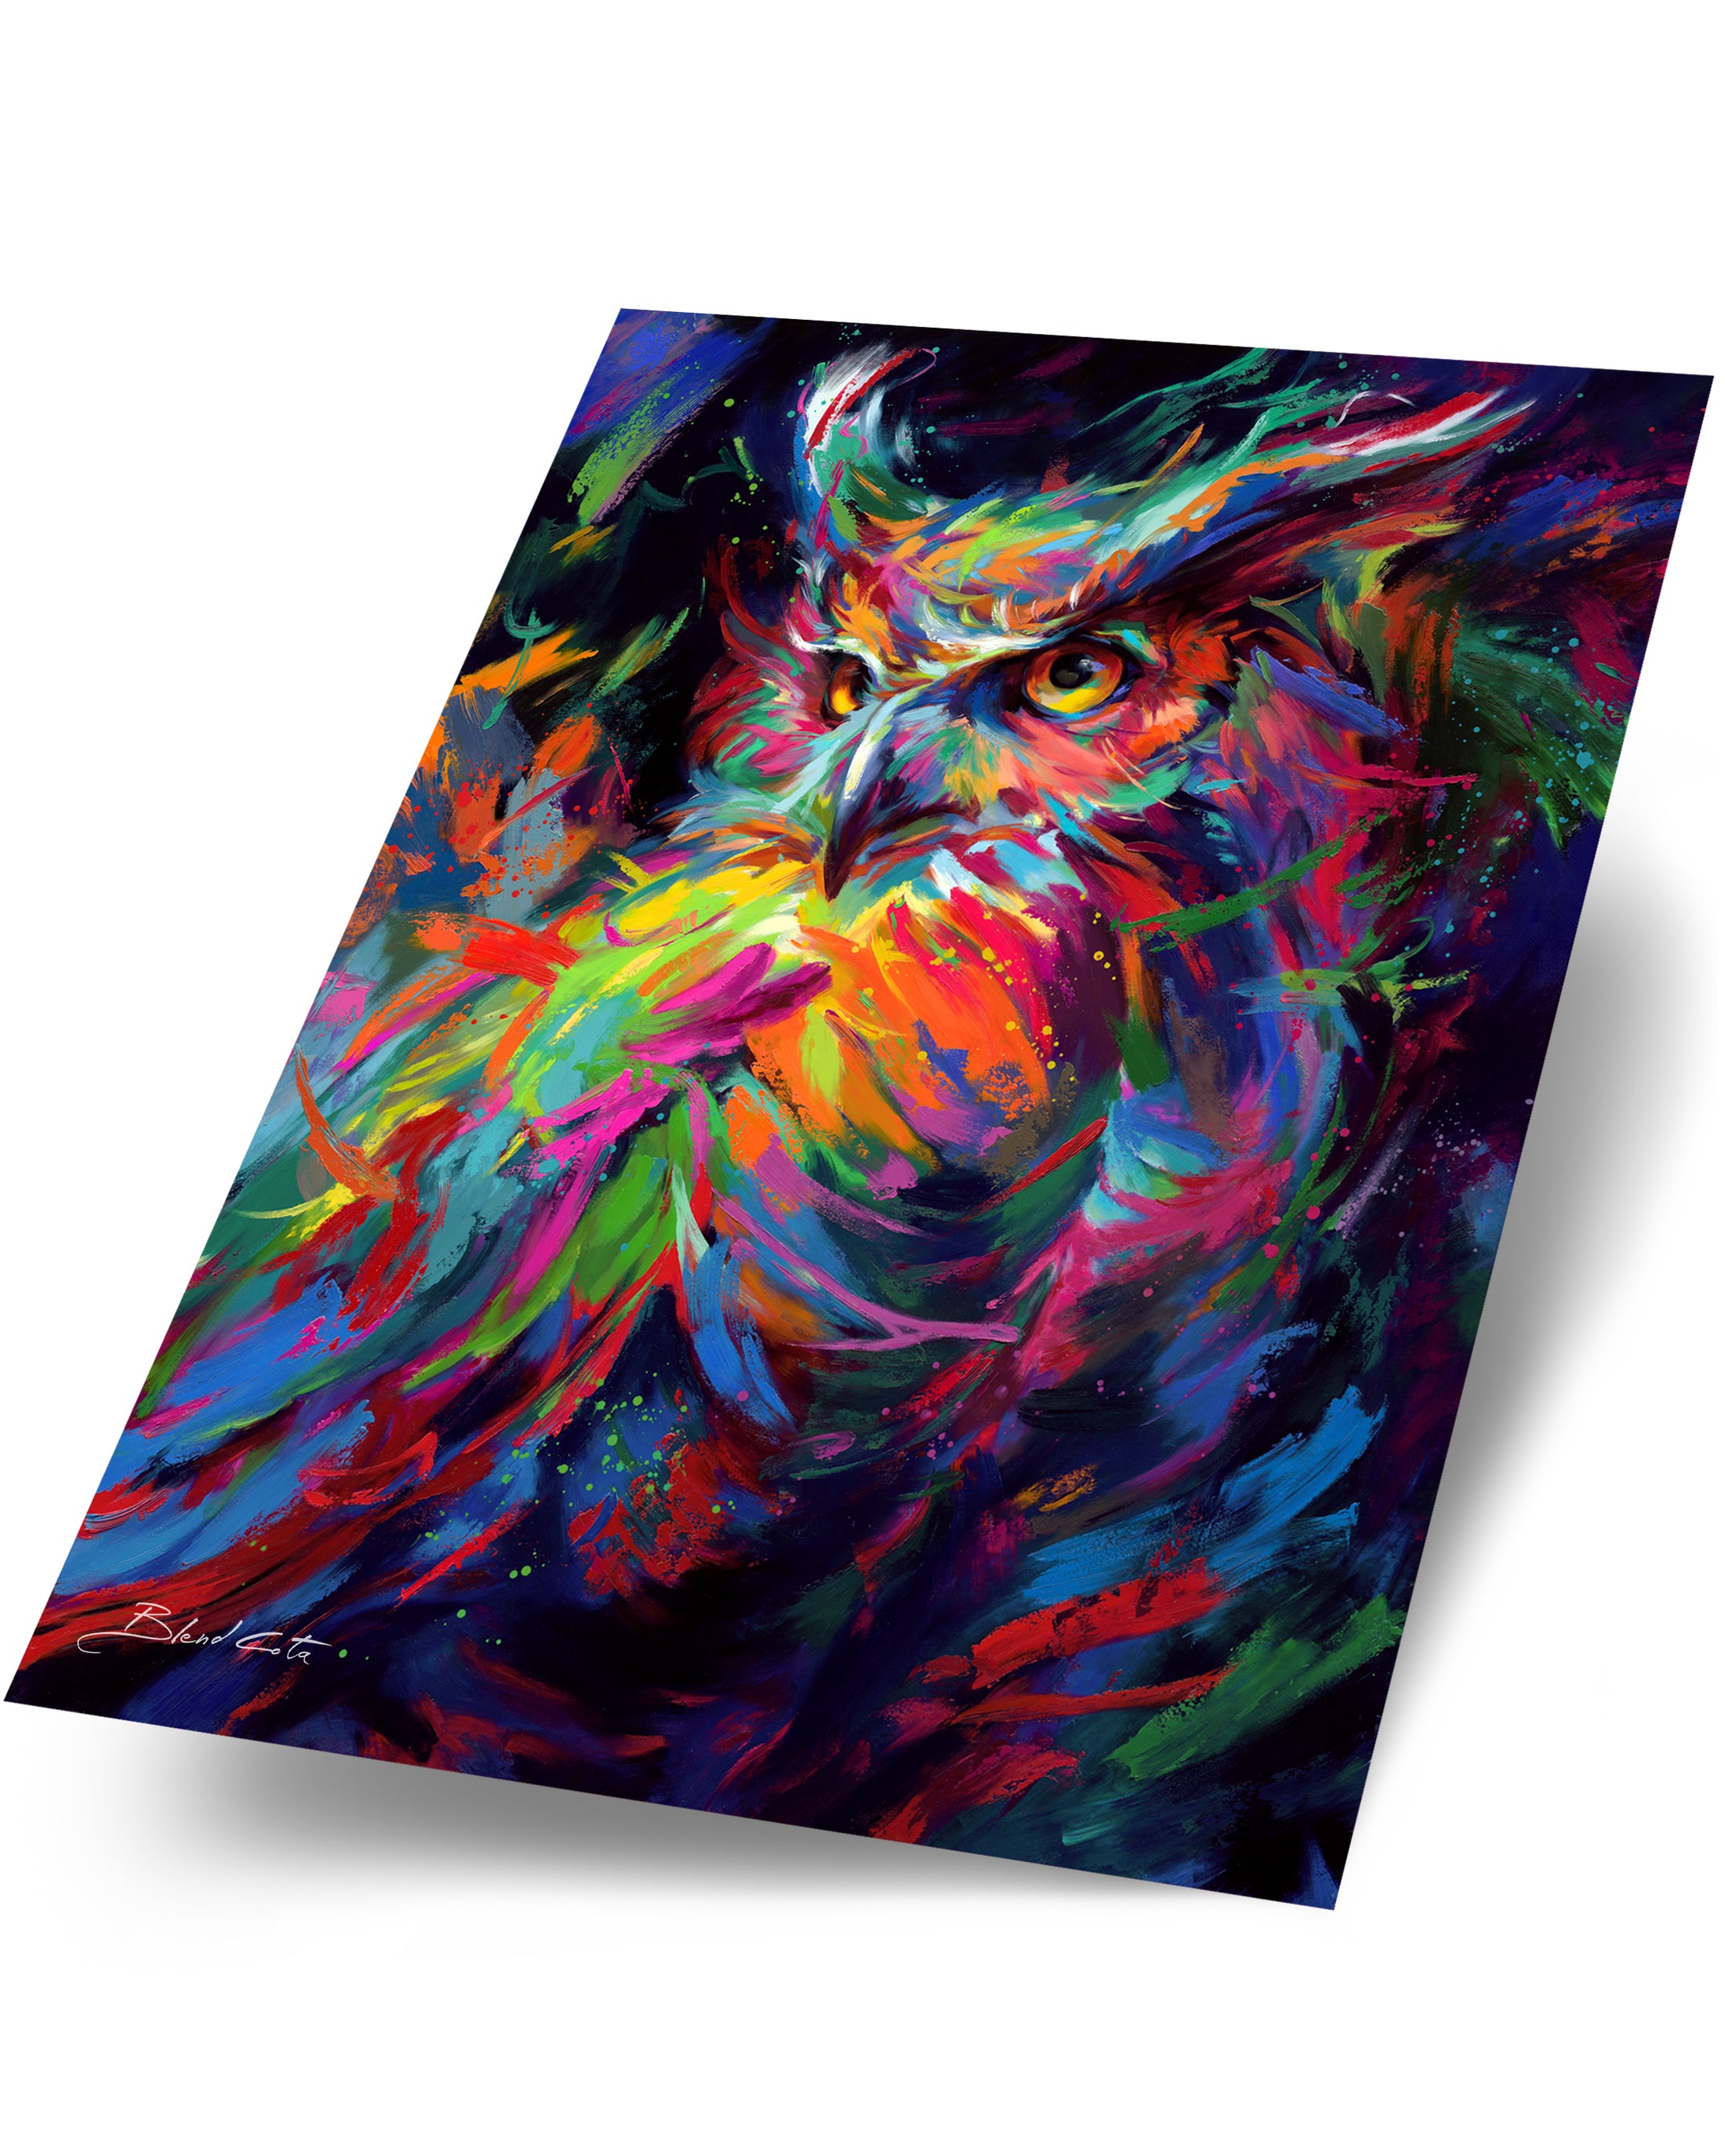 Art print on paper cardstock of blue, green and orange owl in the night sky, symbol of wisdom and knowledge, and represented with Athena of Greece and Minerva of Rome, piercing gaze of great horned owl in colorful brushstrokes, color expressionism style.